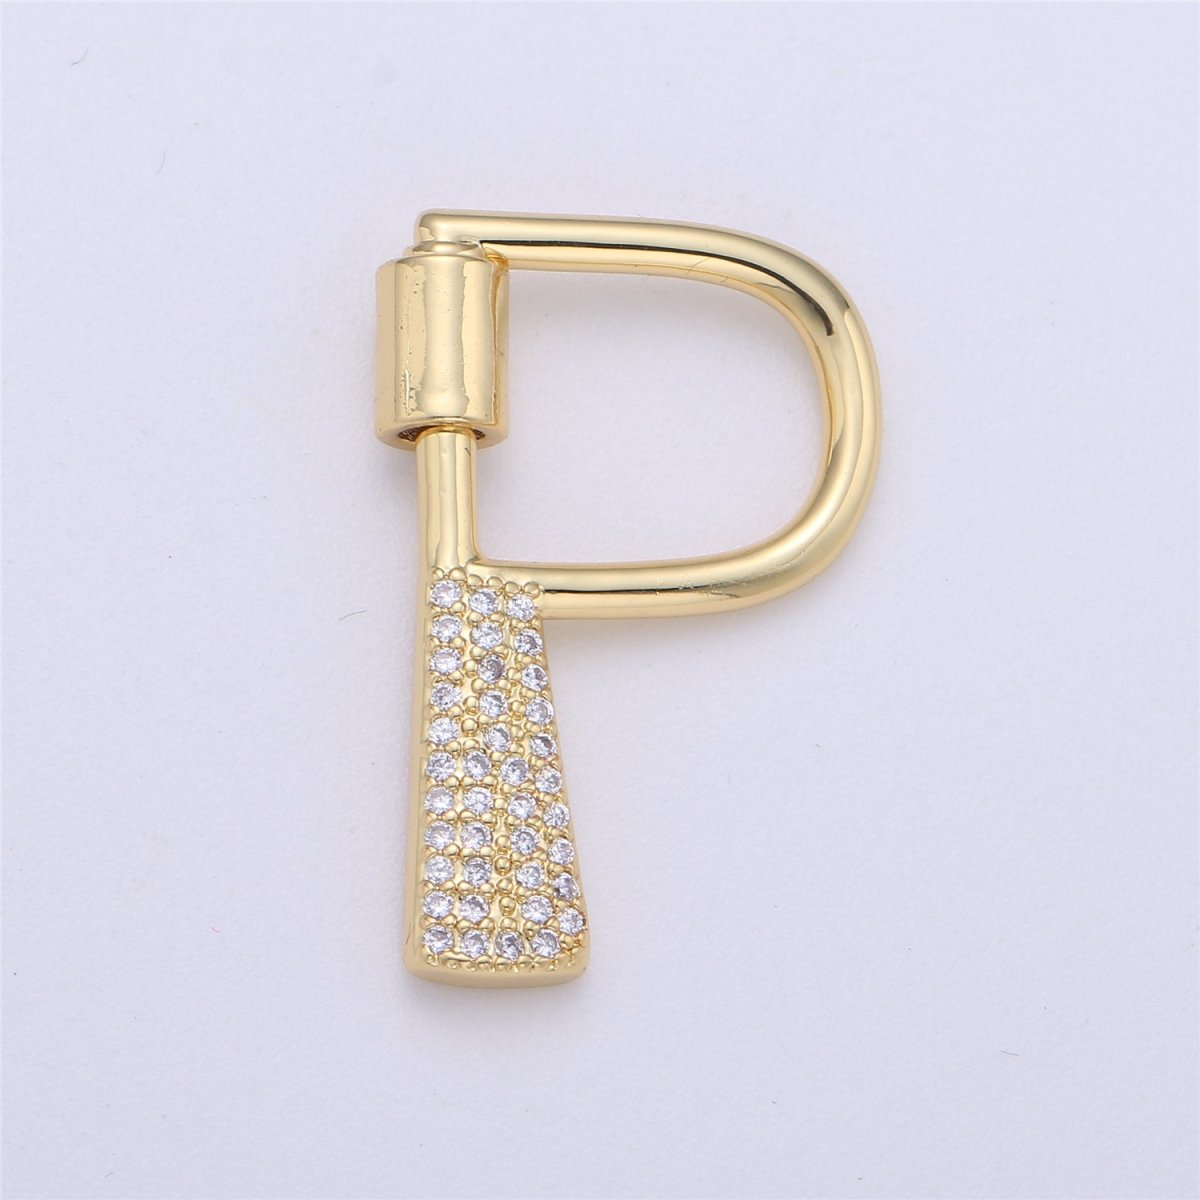 24K Gold-Plated Letter "P" Carabiner with Pave Zirconia Rhinestones, Circle Screw Clasp - DLUXCA